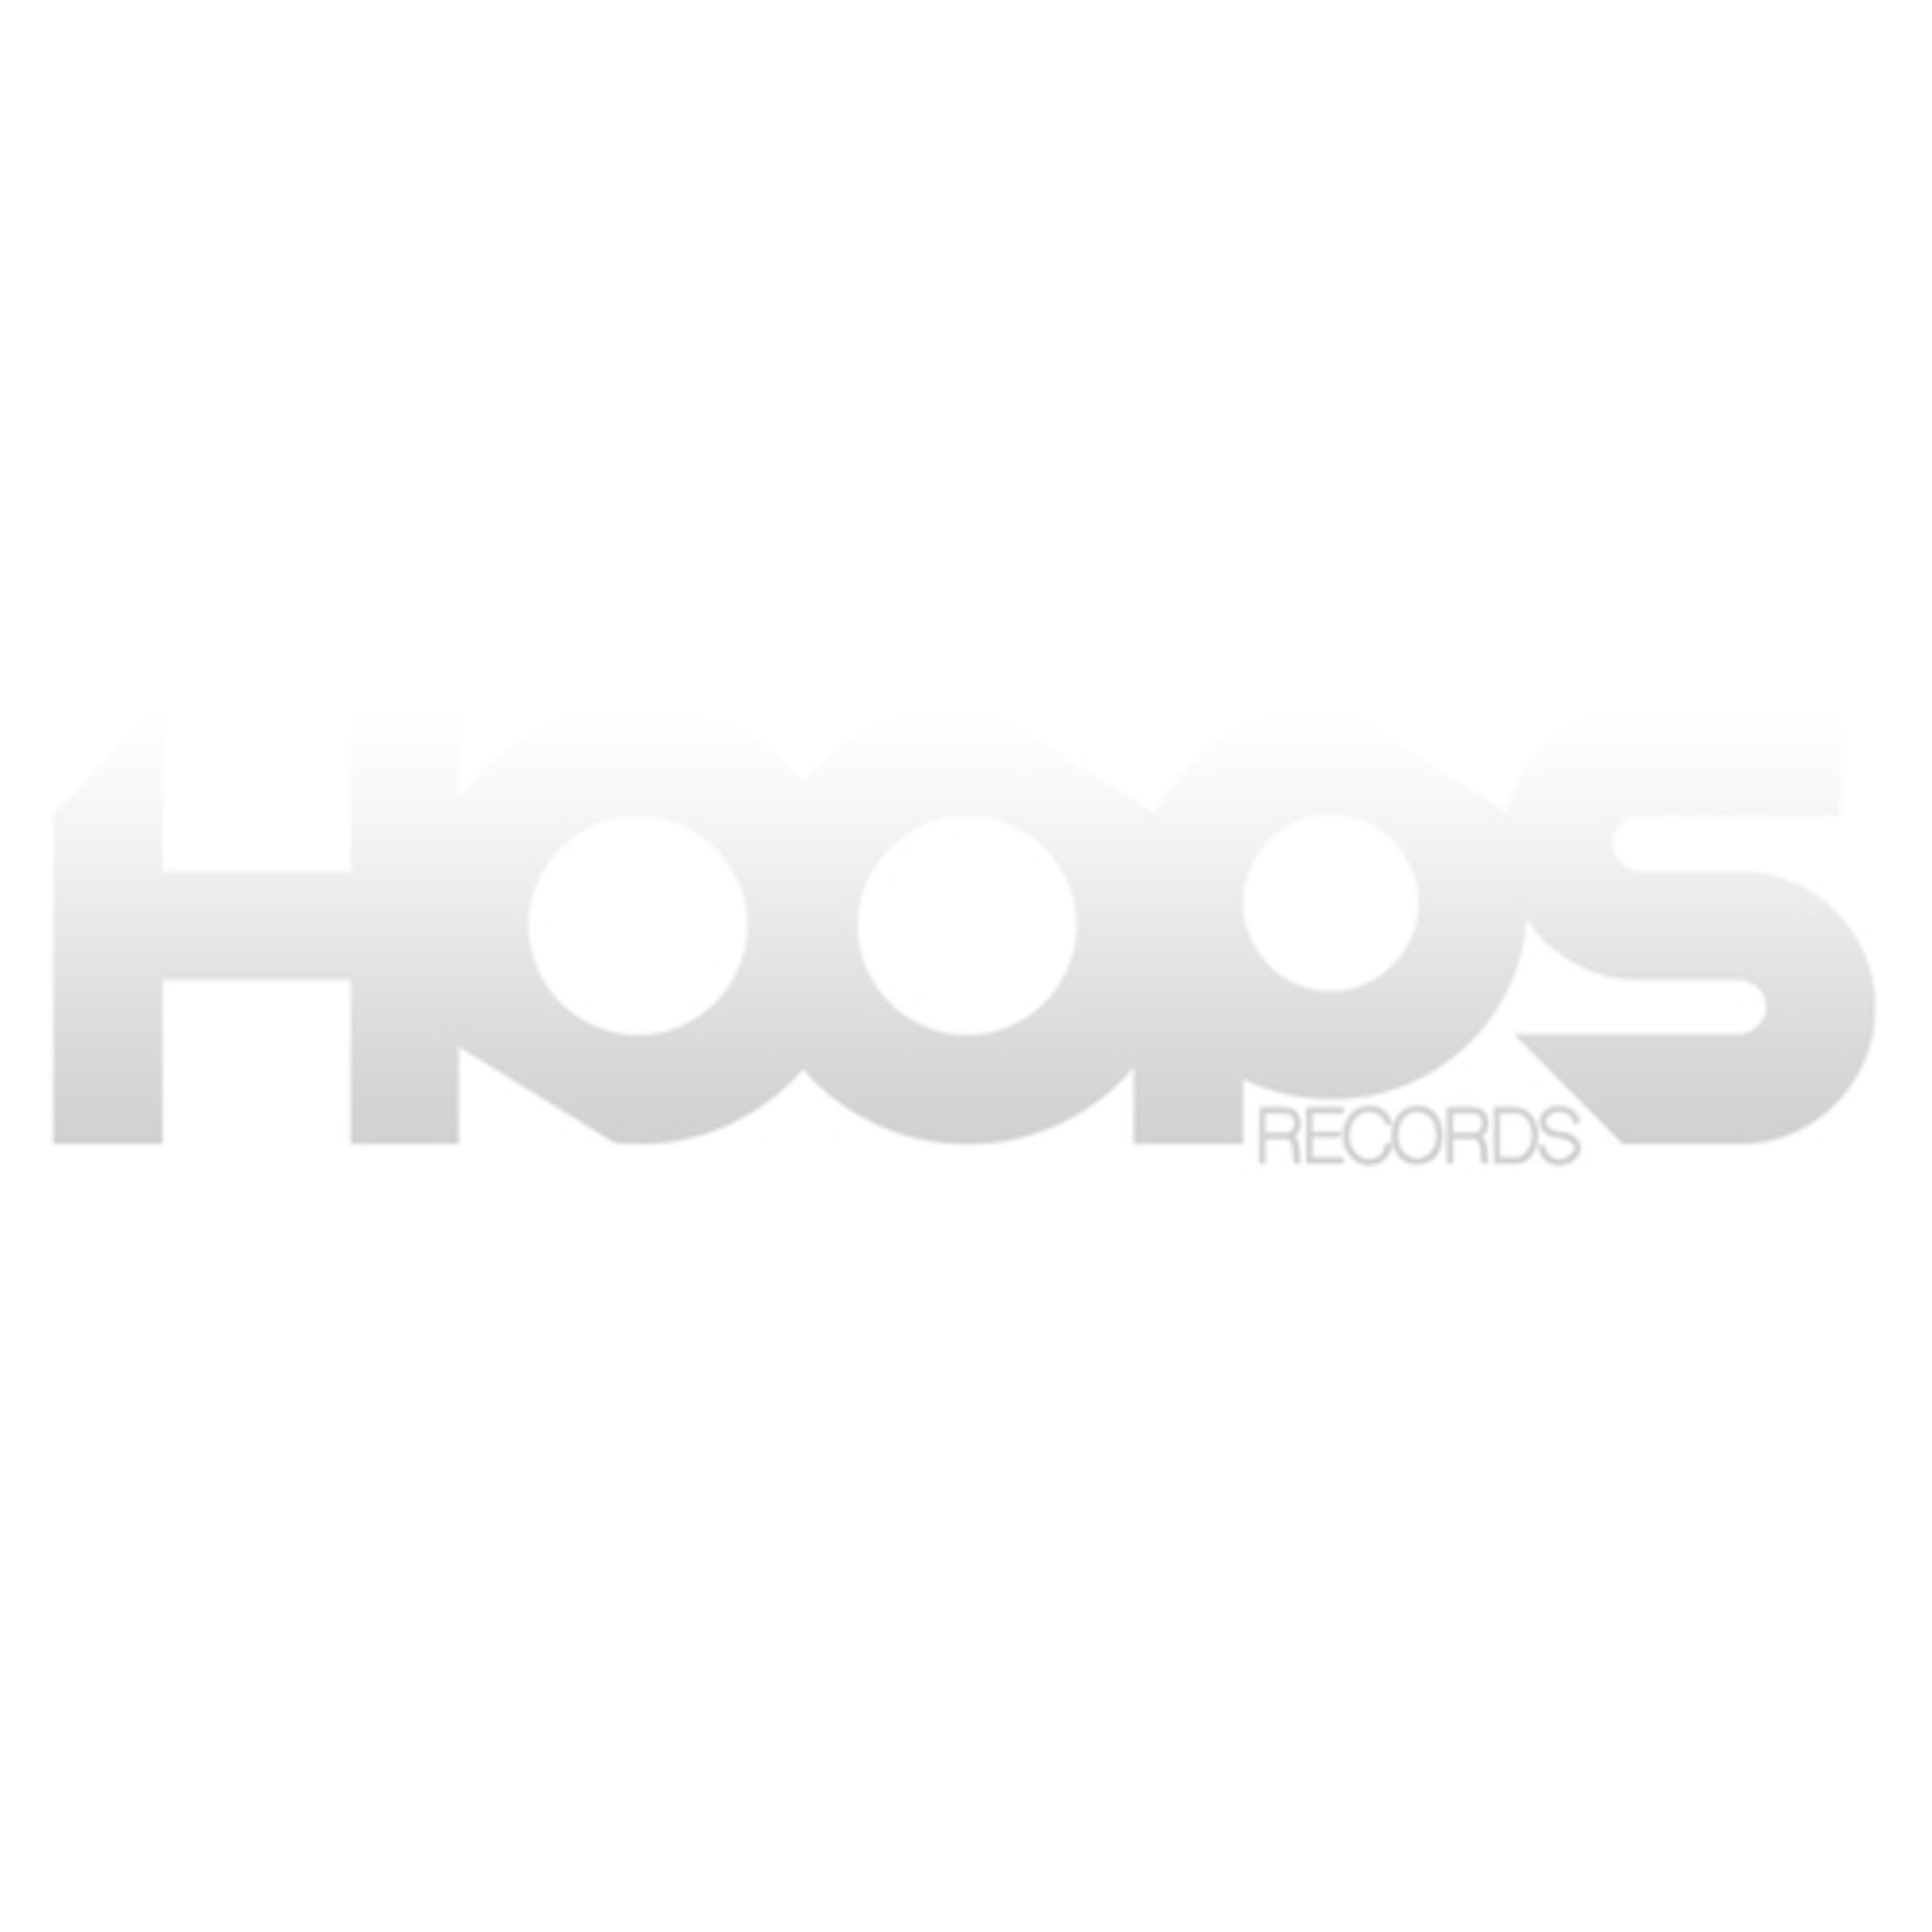 Hoops Records